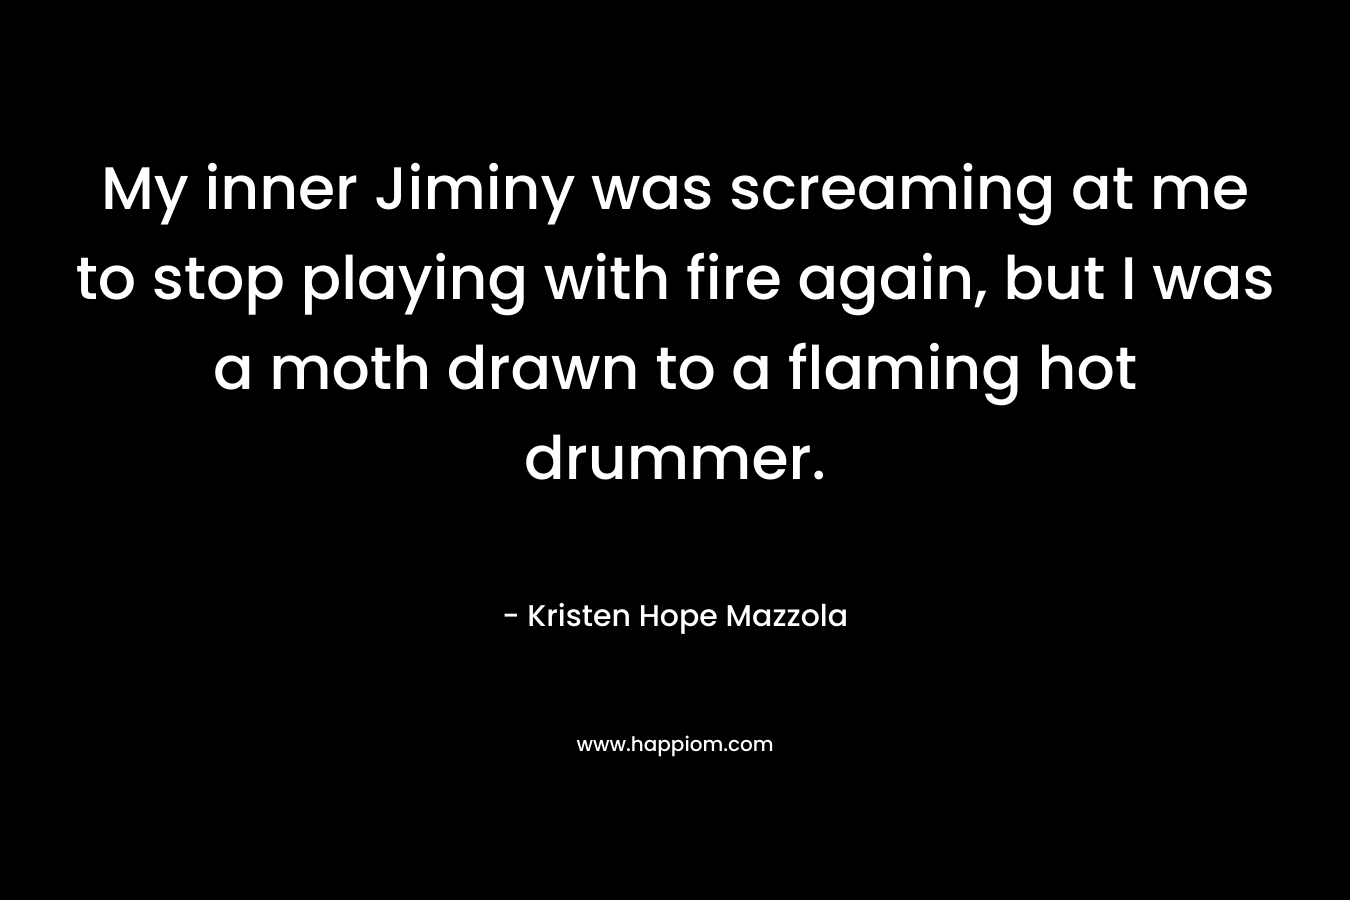 My inner Jiminy was screaming at me to stop playing with fire again, but I was a moth drawn to a flaming hot drummer. – Kristen Hope Mazzola